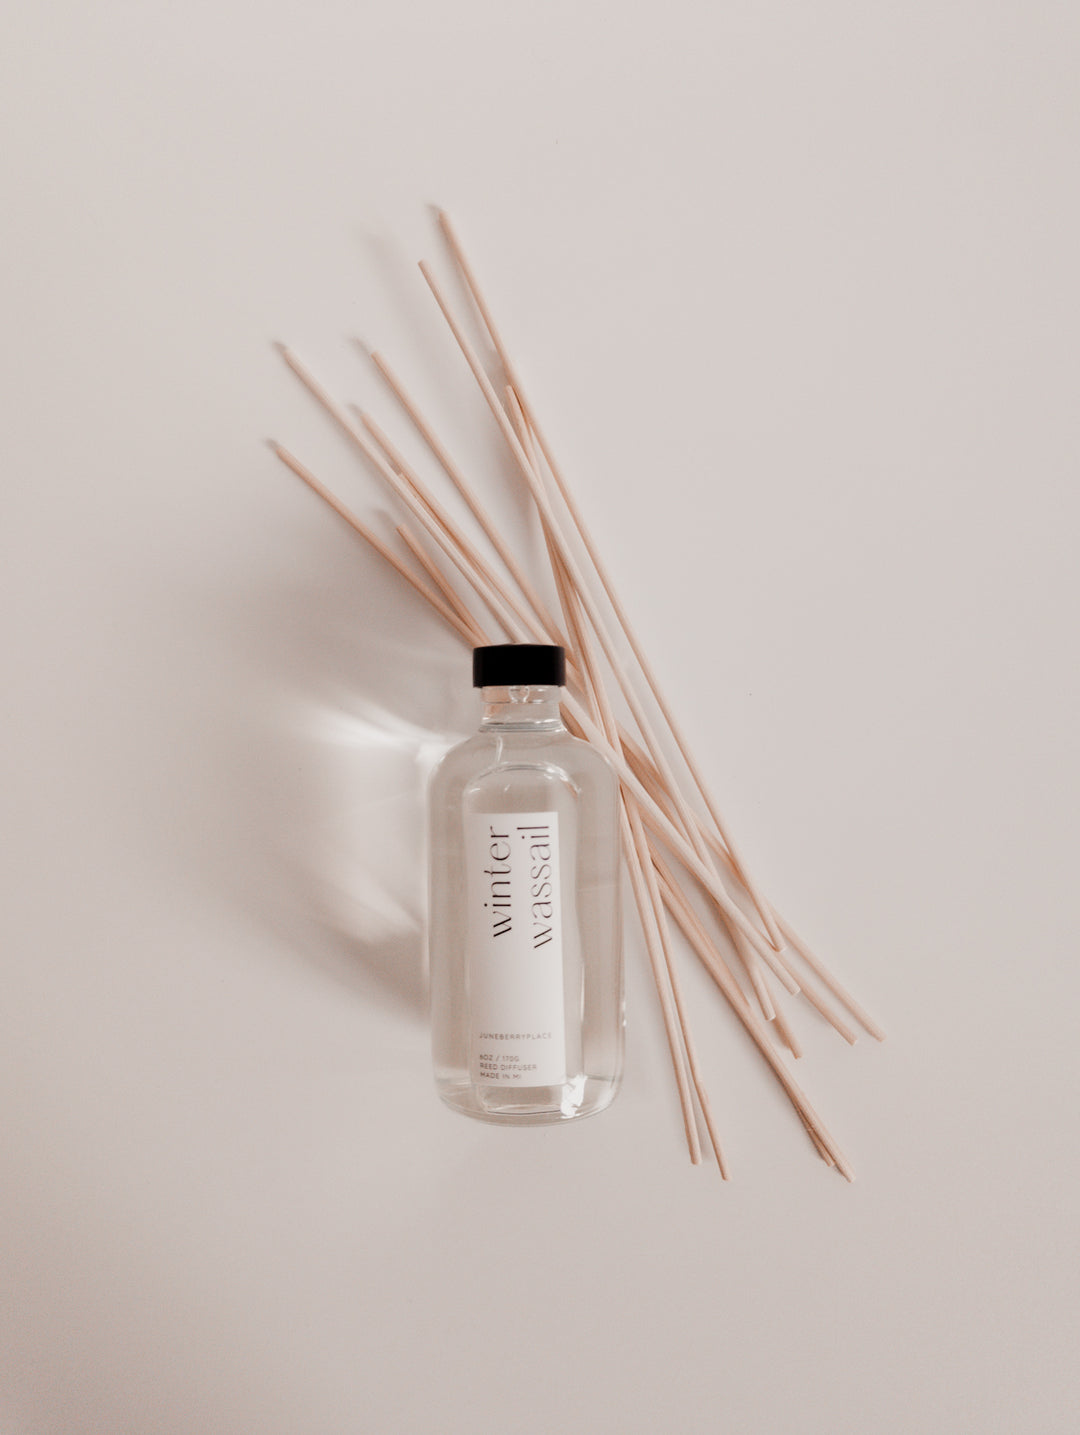 Winter Wassail reed diffuser: Winter Collection.  Modern clear glass, non-toxic formula. For home fragrance fans who love a clean aesthetic